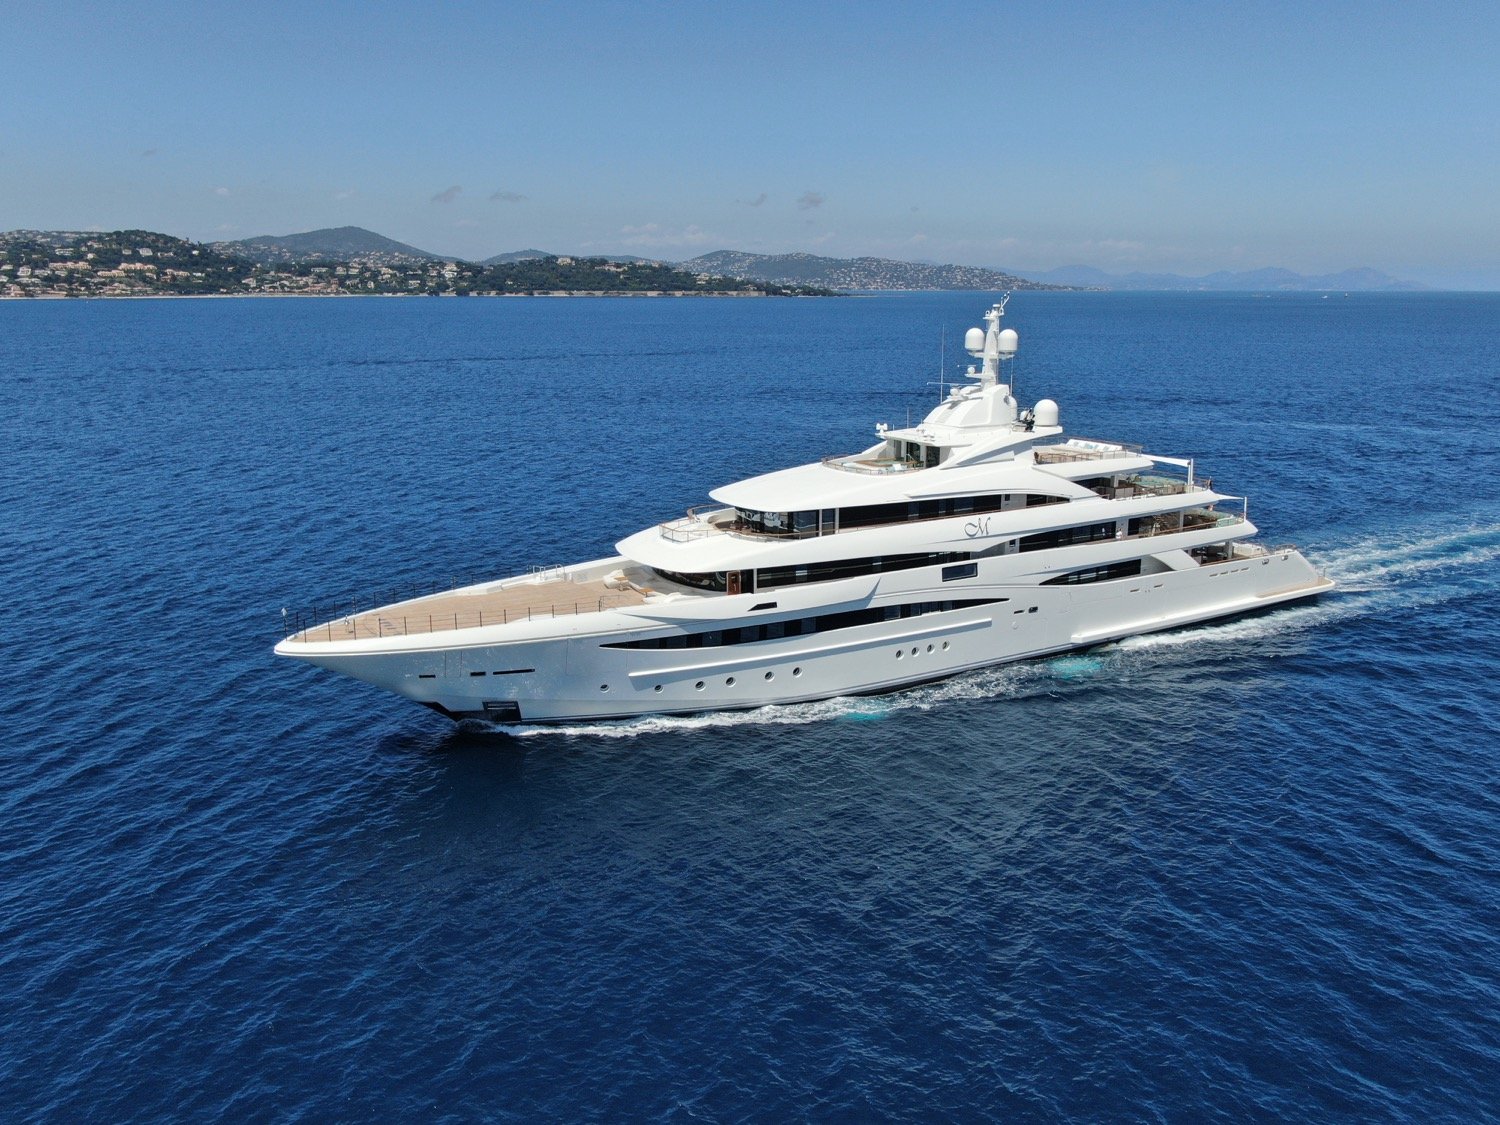 12 Guests Yacht for Charter | 79 m CRN Yacht Charter